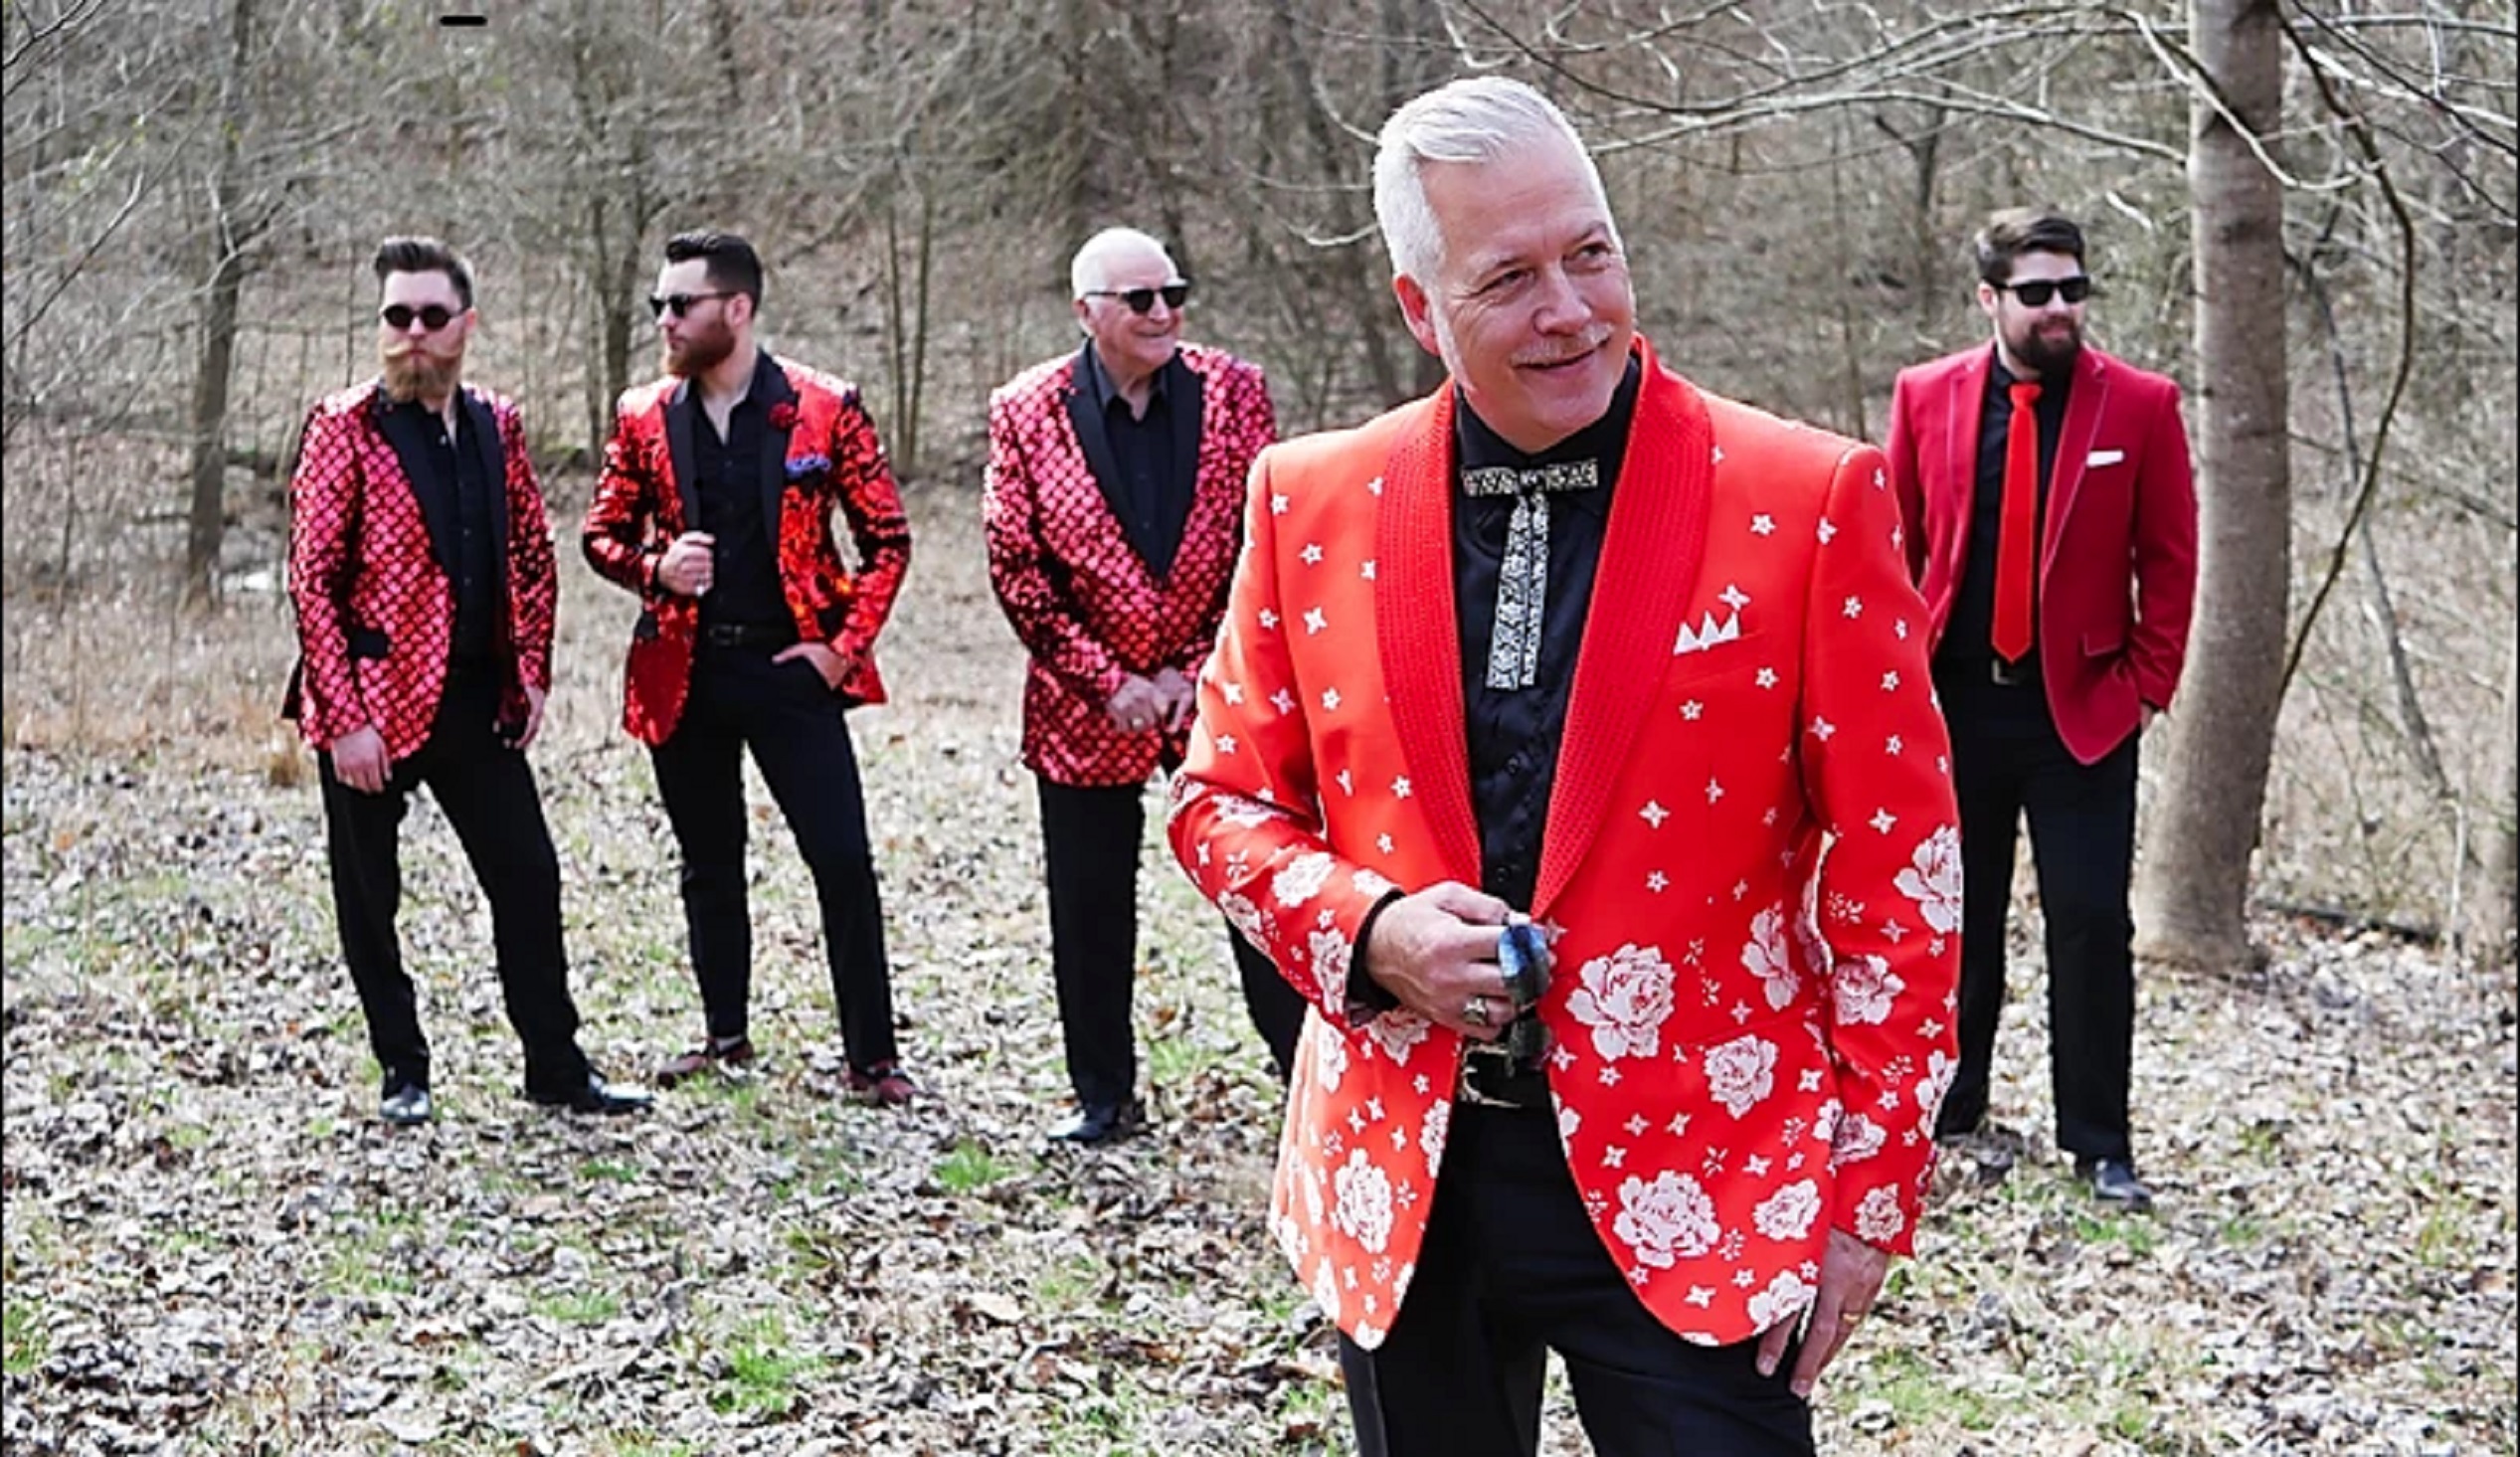 Gary Brewer & The Kentucky Ramblers Announce 40th Anniversary Celebration Tour